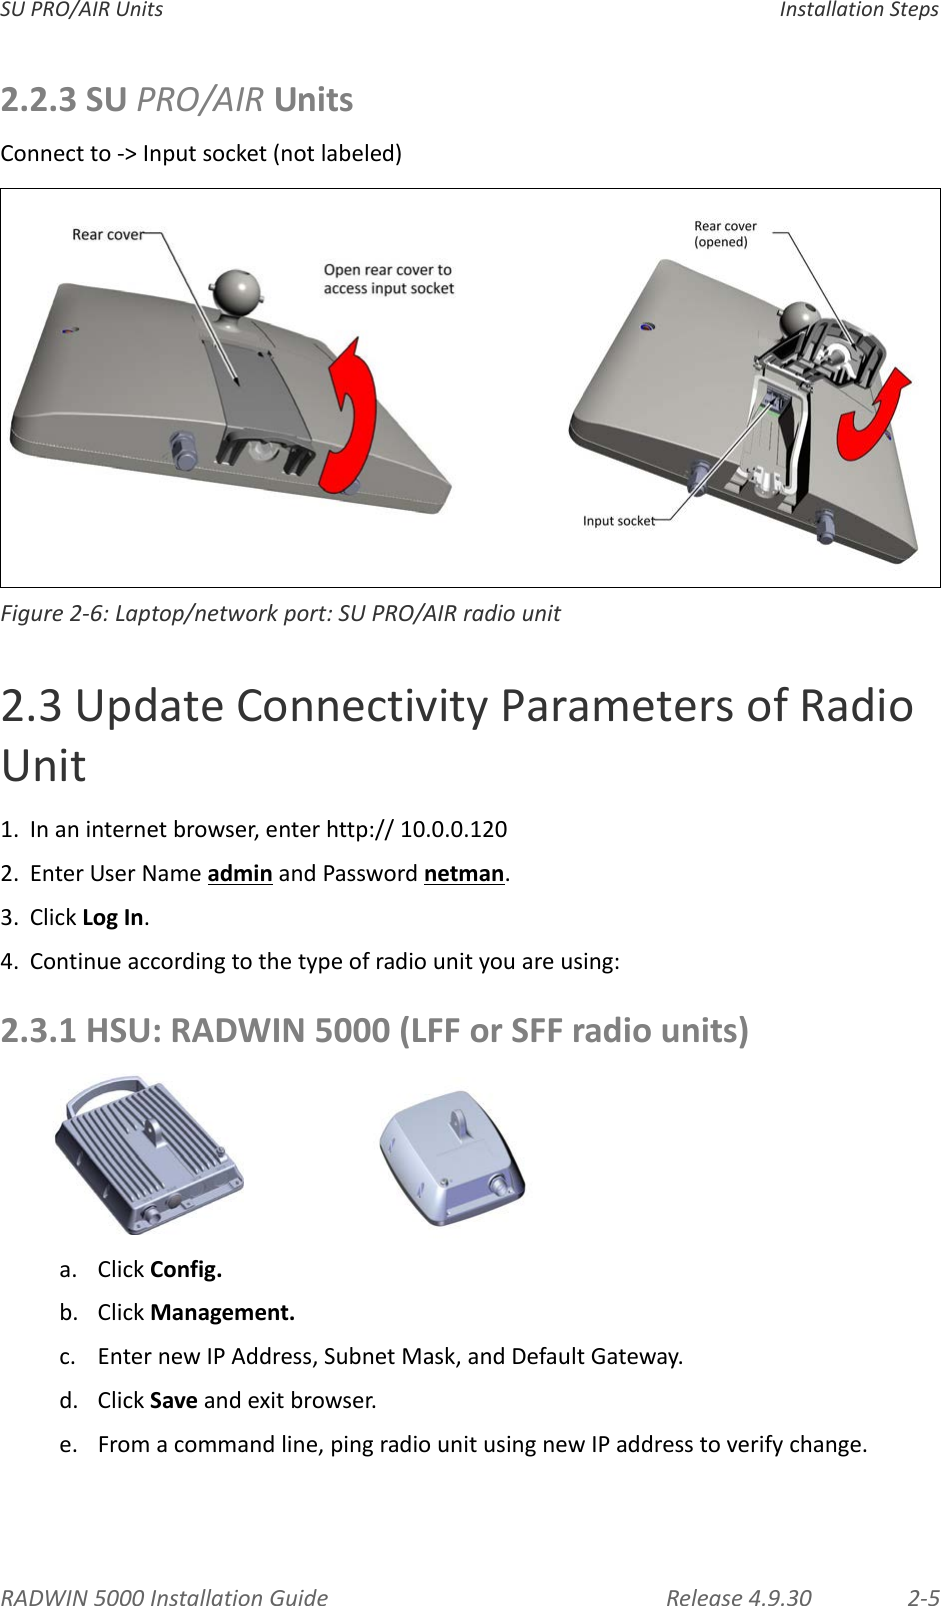 RADWIN5000InstallationGuide Release4.9.30 2‐5SUPRO/AIRUnits InstallationSteps2.2.3SUPRO/AIRUnitsConnectto‐&gt;Inputsocket(notlabeled)Figure2‐6:Laptop/networkport:SUPRO/AIRradiounit2.3UpdateConnectivityParametersofRadioUnit1. Inaninternetbrowser,enterhttp://10.0.0.1202. EnterUserNameadminandPasswordnetman.3. ClickLogIn.4. Continueaccordingtothetypeofradiounityouareusing:2.3.1HSU:RADWIN5000(LFForSFFradiounits)a. ClickConfig.b. ClickManagement.c. EnternewIPAddress,SubnetMask,andDefaultGateway.d. ClickSaveandexitbrowser.e. Fromacommandline,pingradiounitusingnewIPaddresstoverifychange.